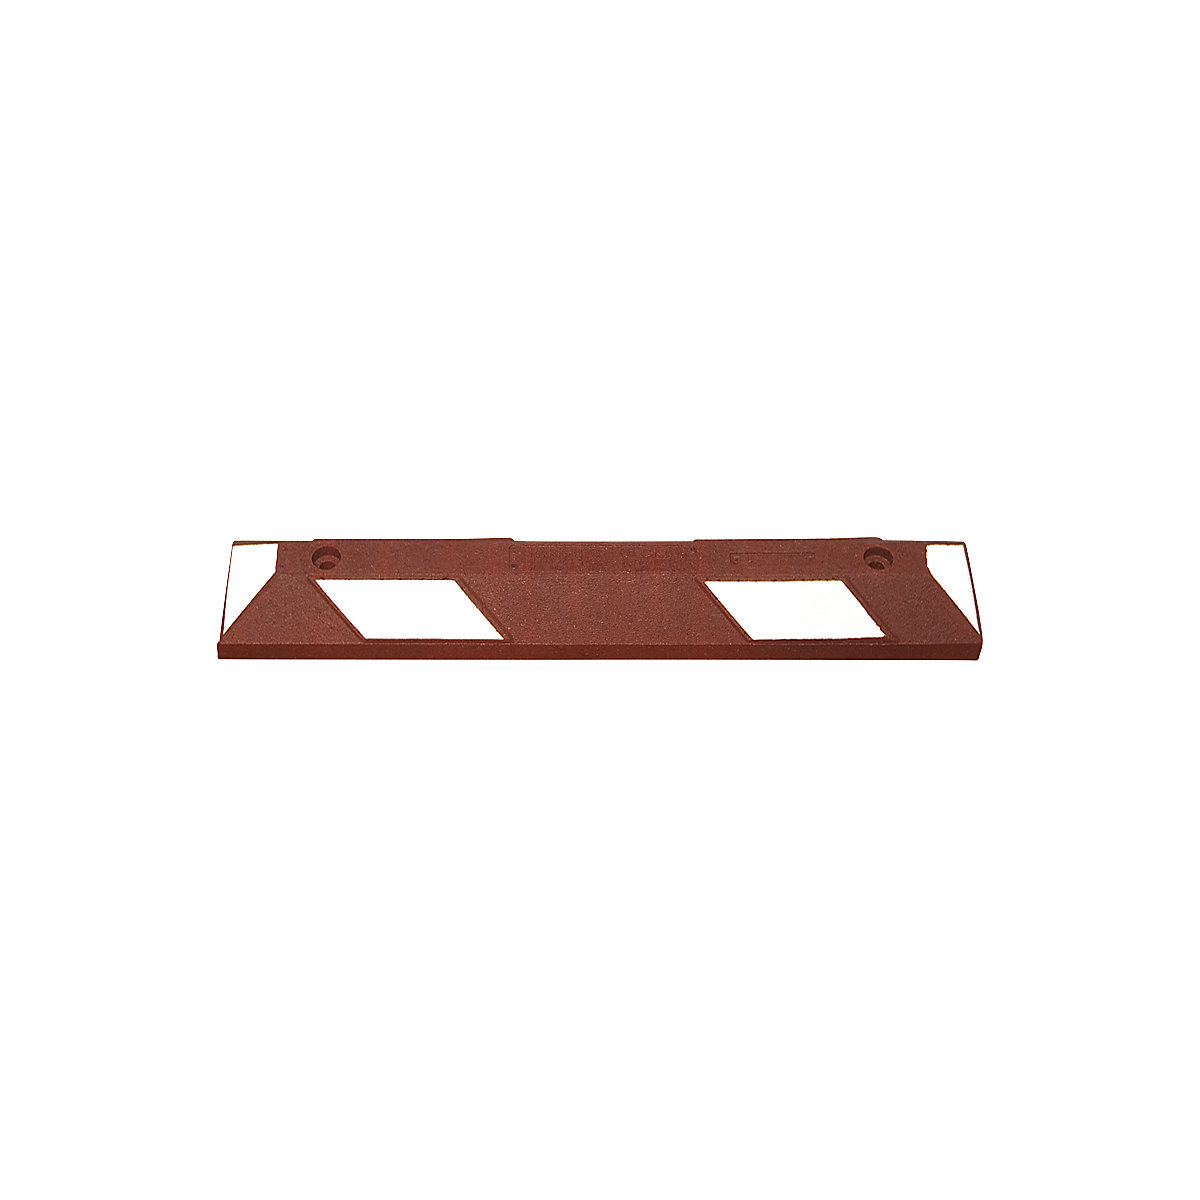 Park-AID® wheel stop, LxWxH 900 x 150 x 100 mm, red brown / white-11